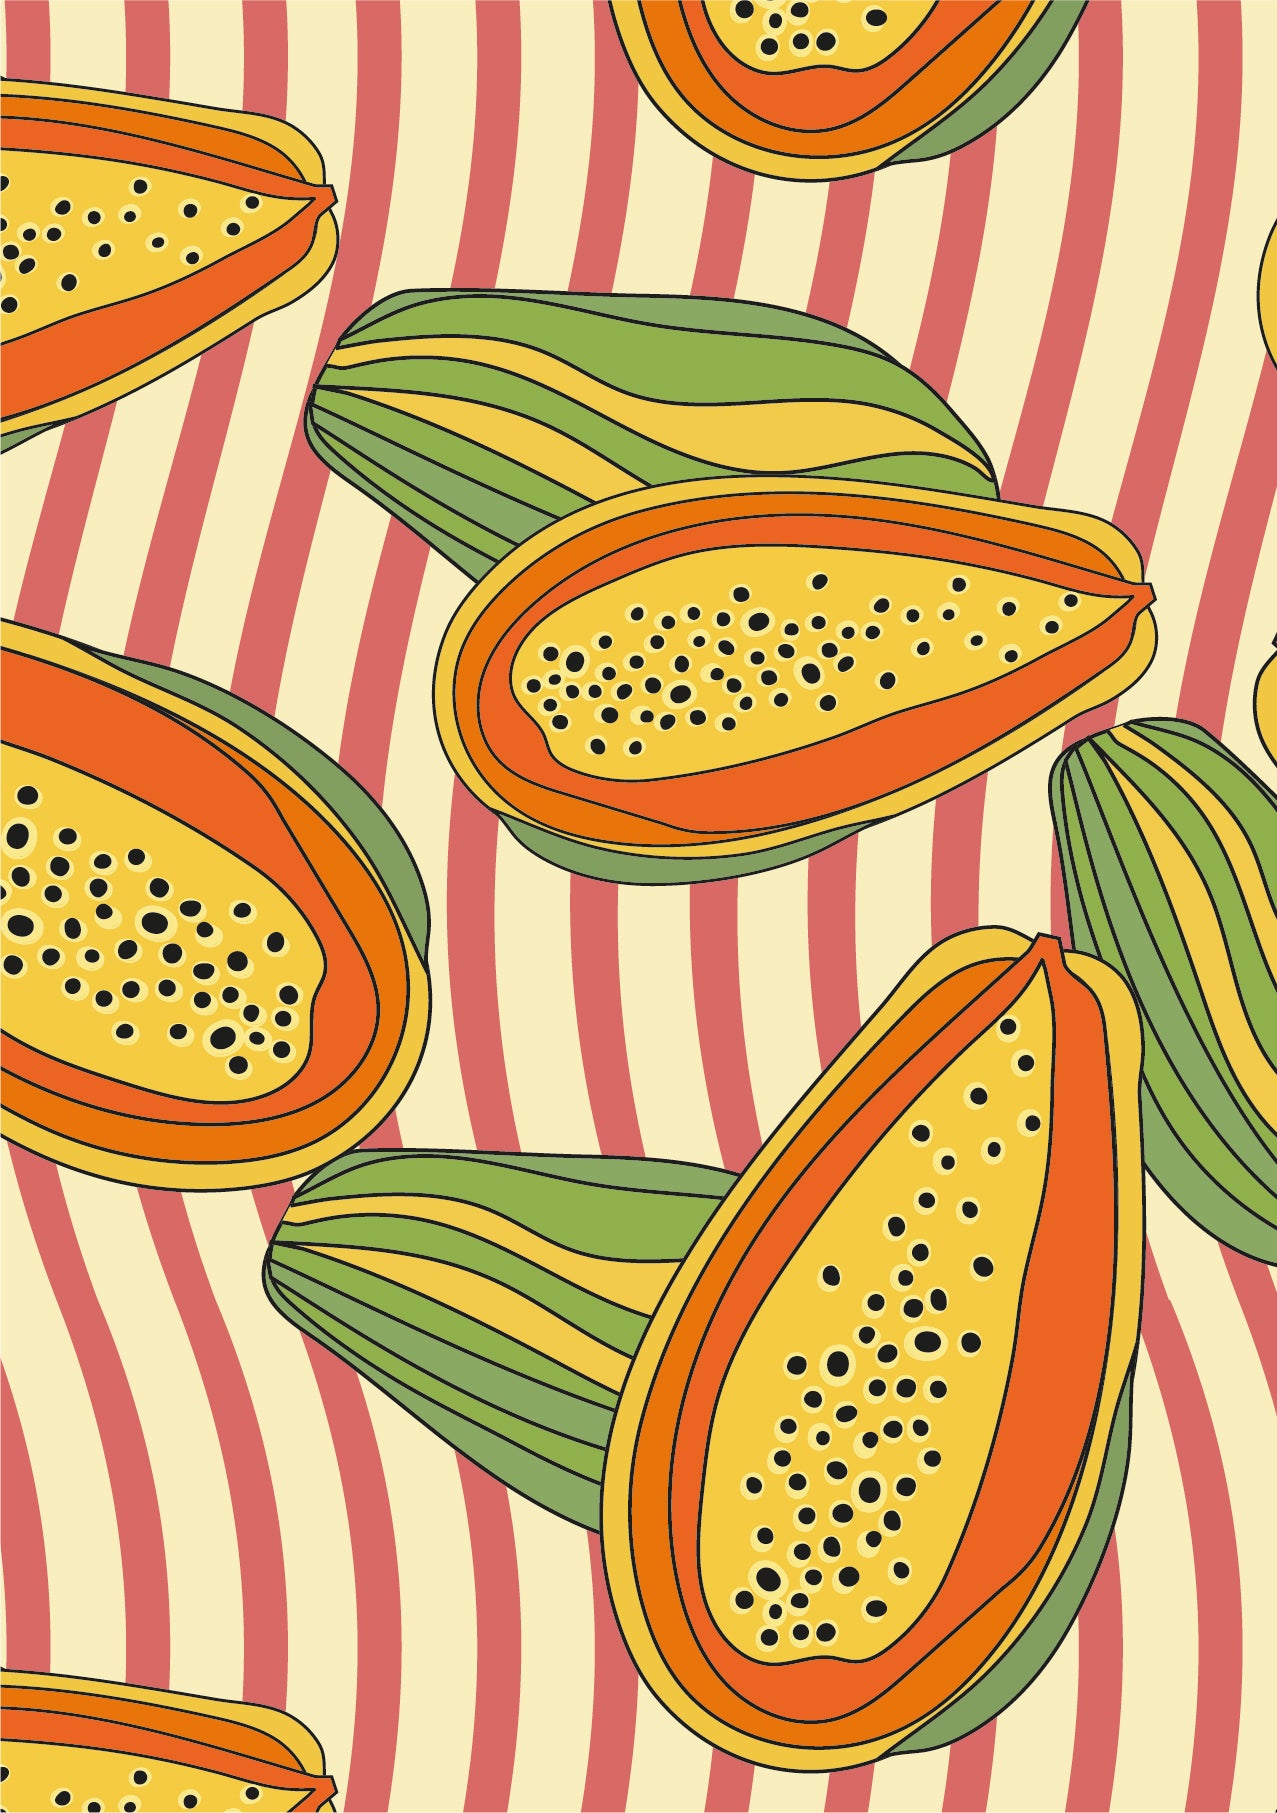 Greeting card with a cartoon-style illustration featuring lots of papayas on a dark pink and beige stripy background. Some possible tags for the greeting card could be greeting card, celebration, occasion, whimsical, papayas, and colourful.